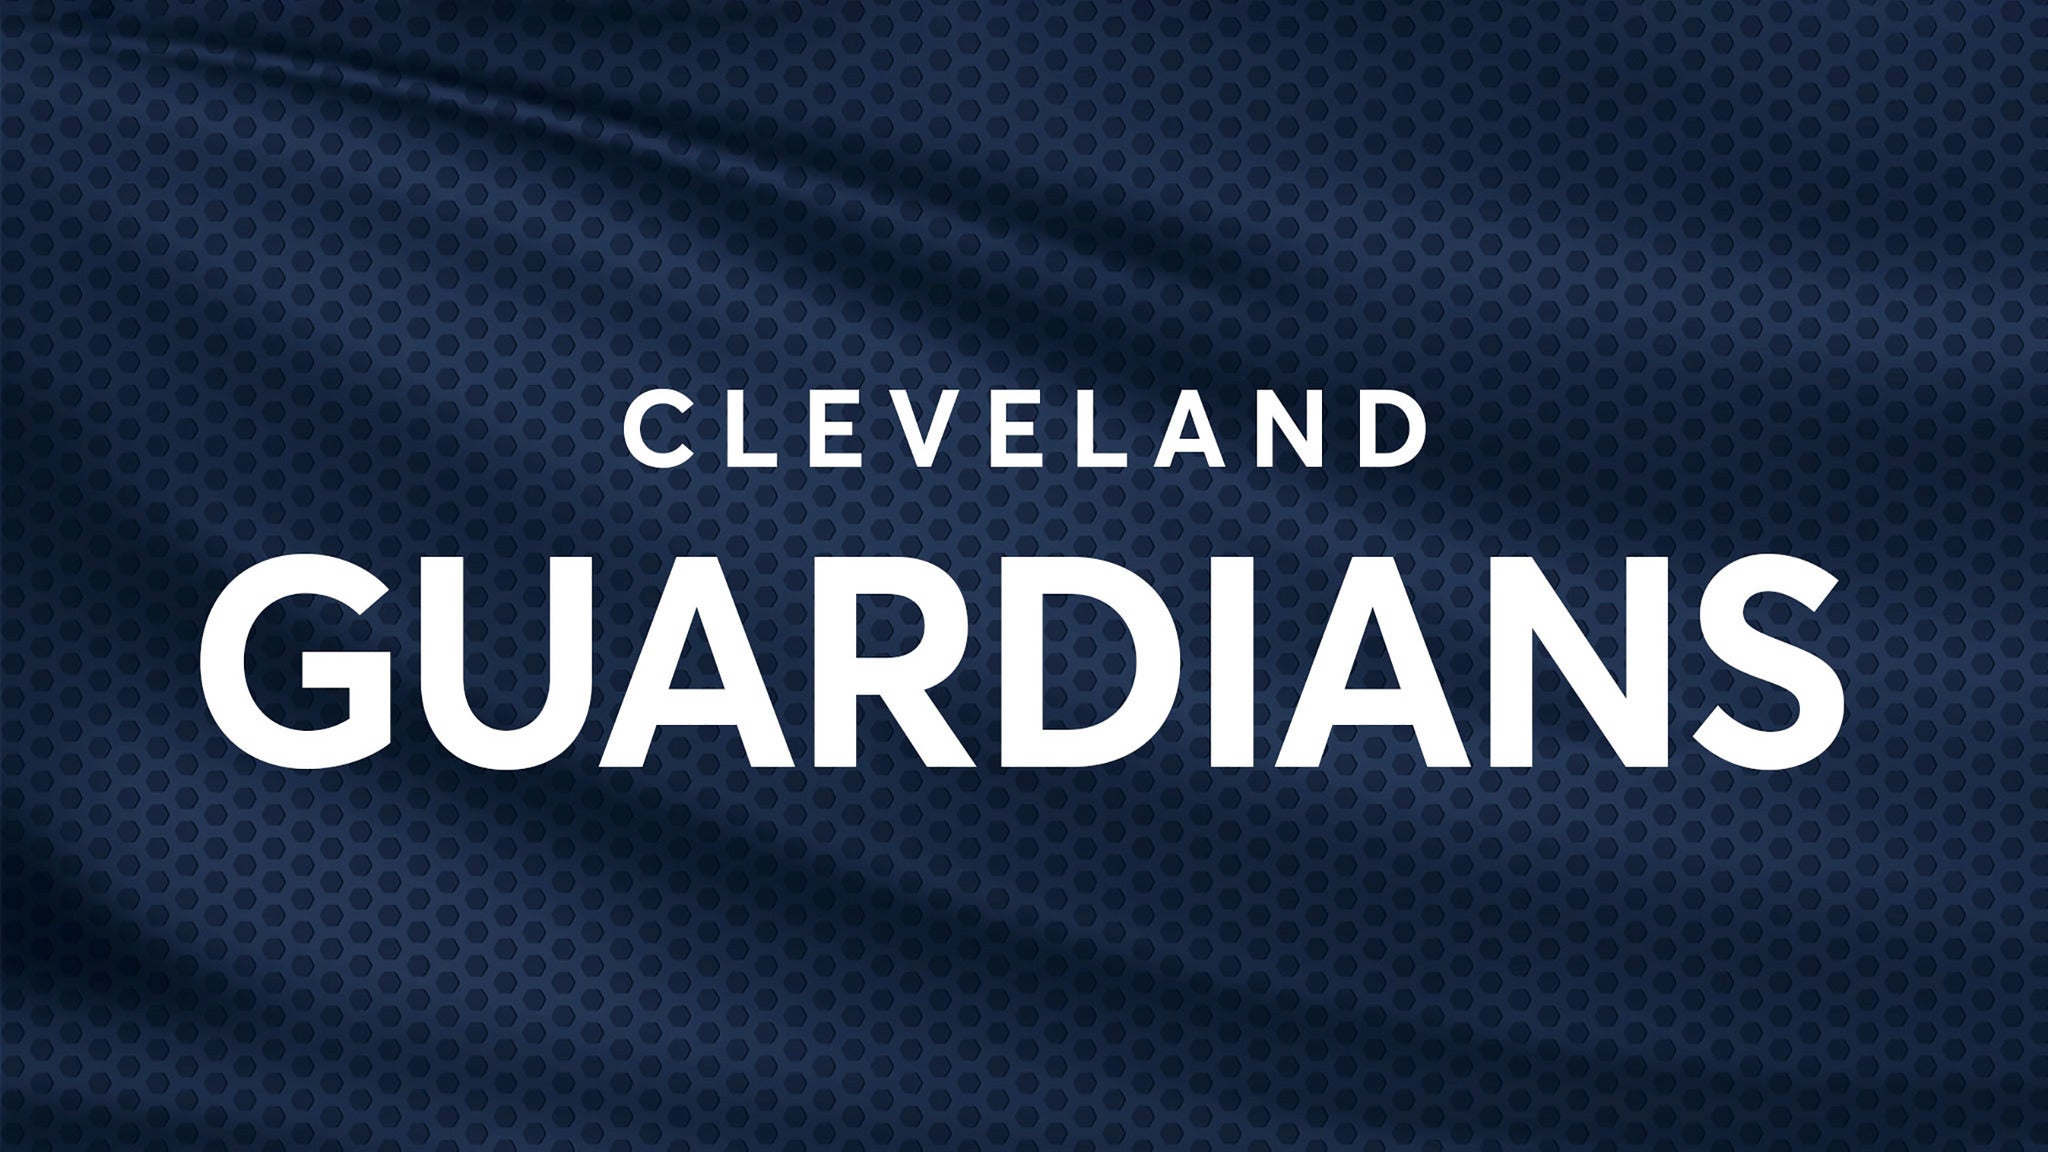 Cleveland Guardians vs. Tampa Bay Rays